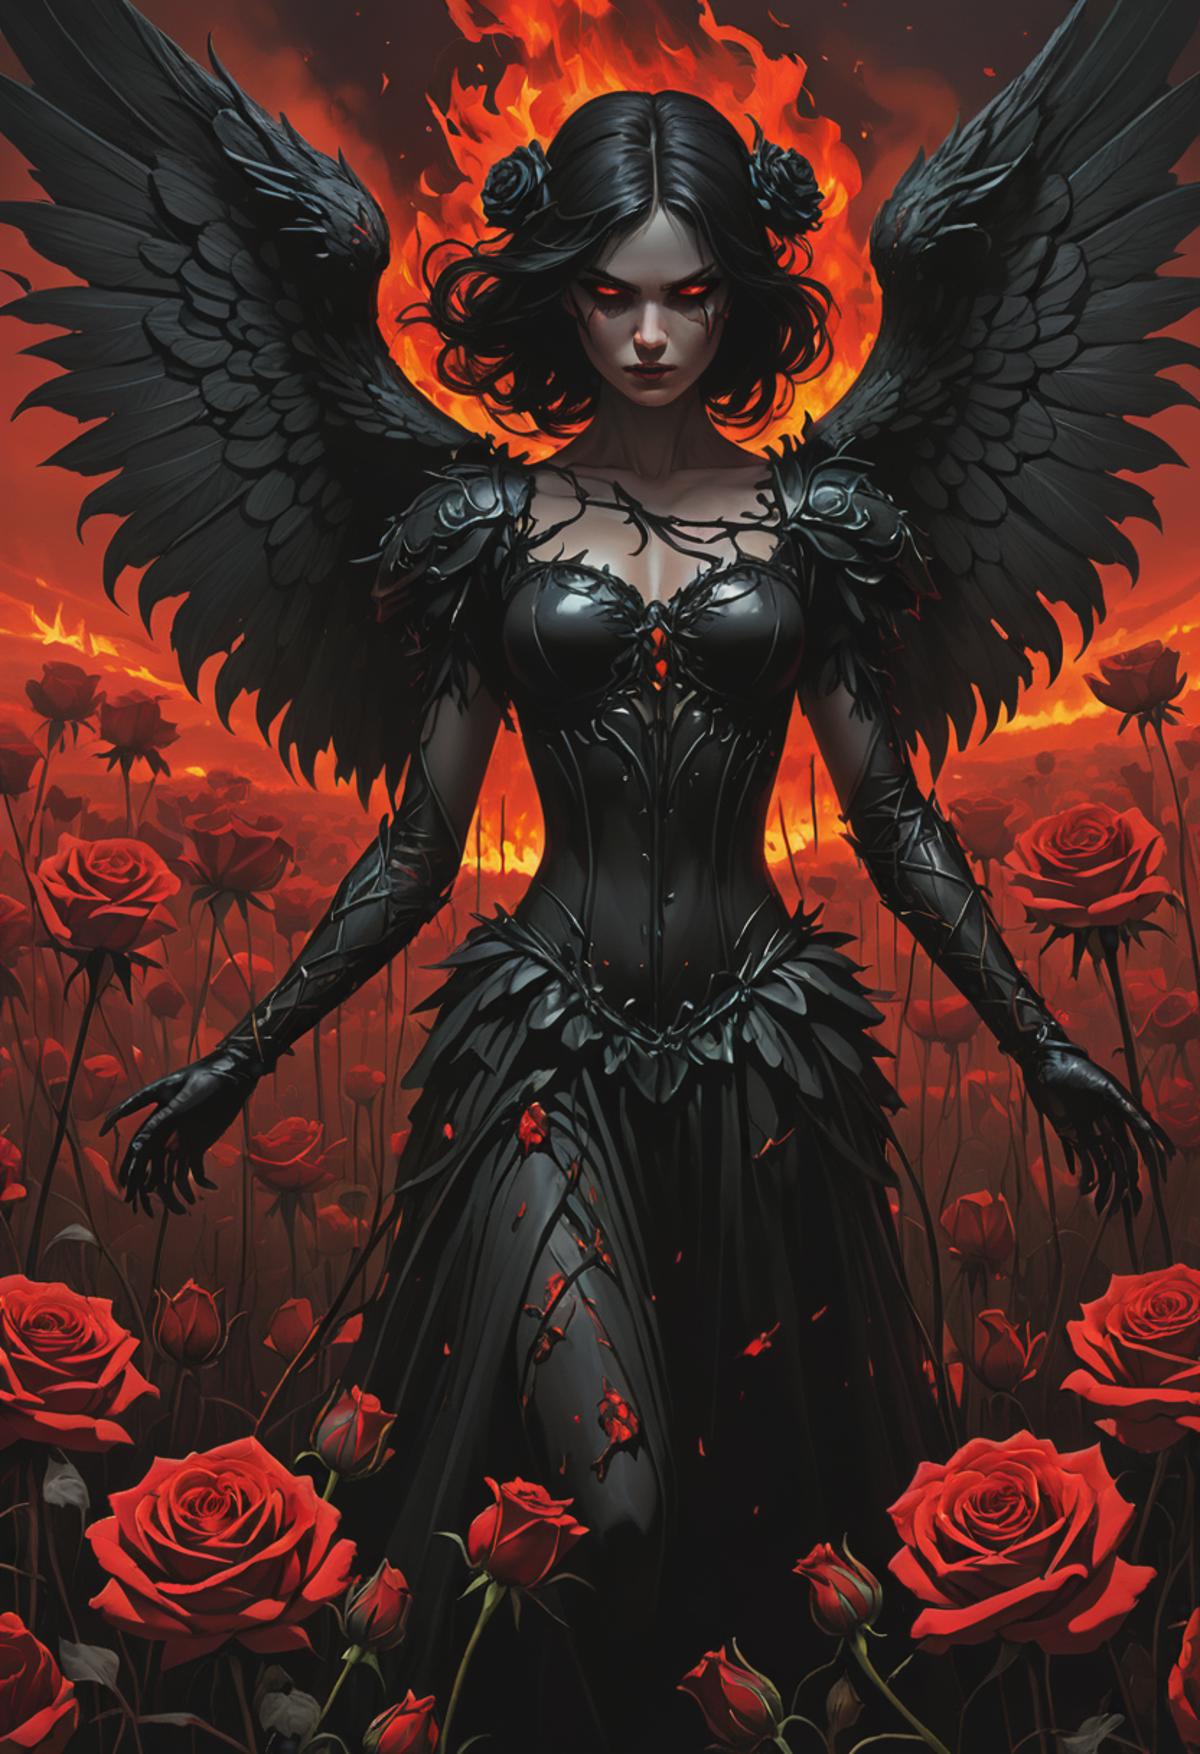 Dark Fantasy Art of a Woman with Wings and Horns in a Black Dress.